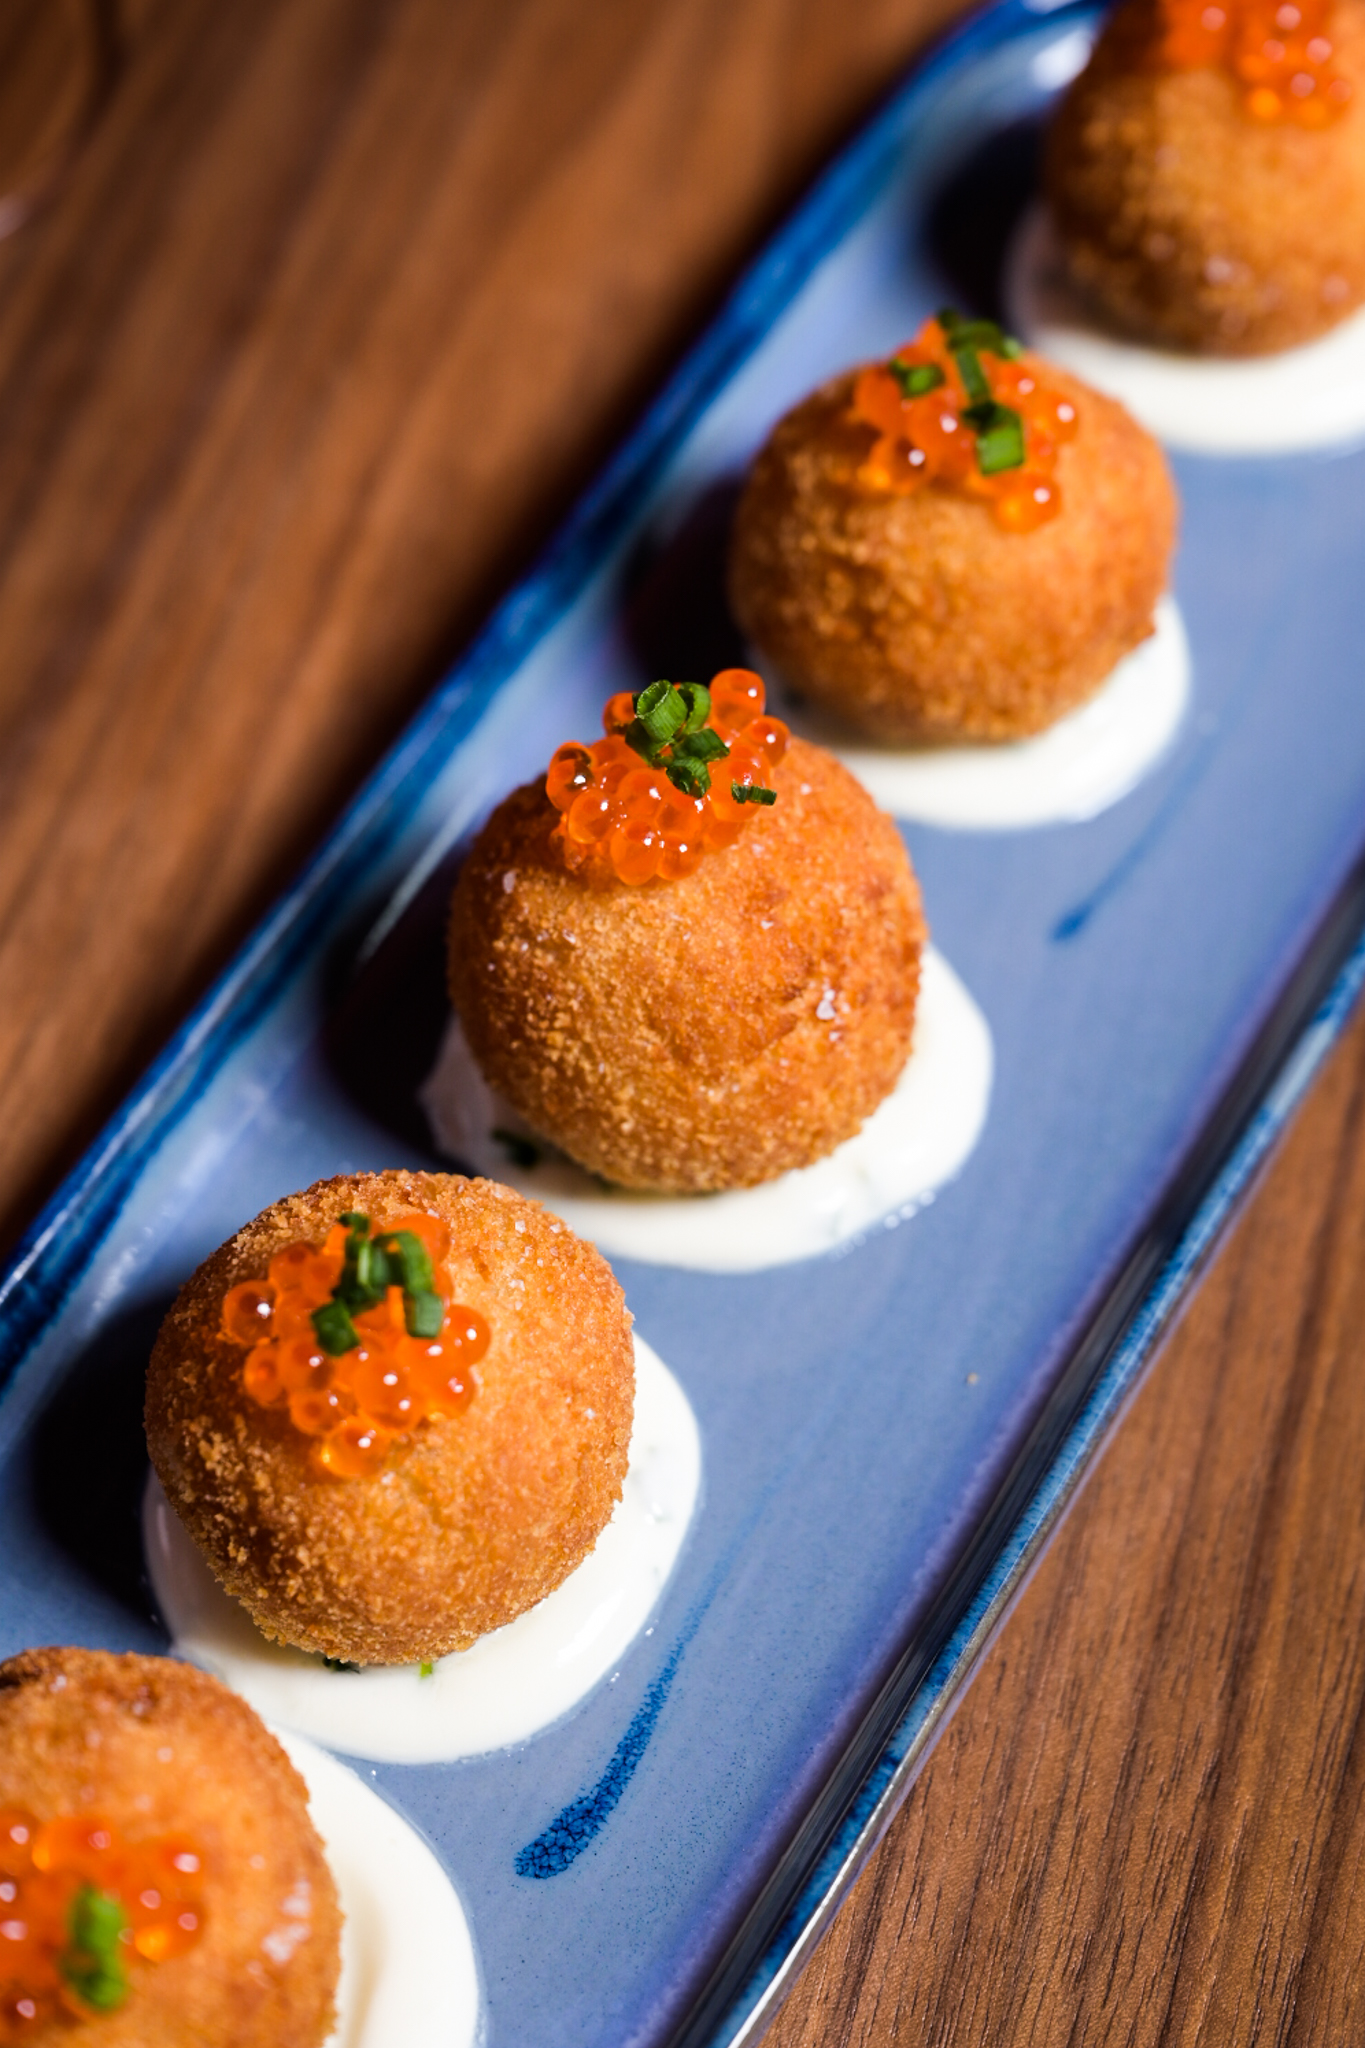 Boulettes with trout roe from Commons Club New Orleans